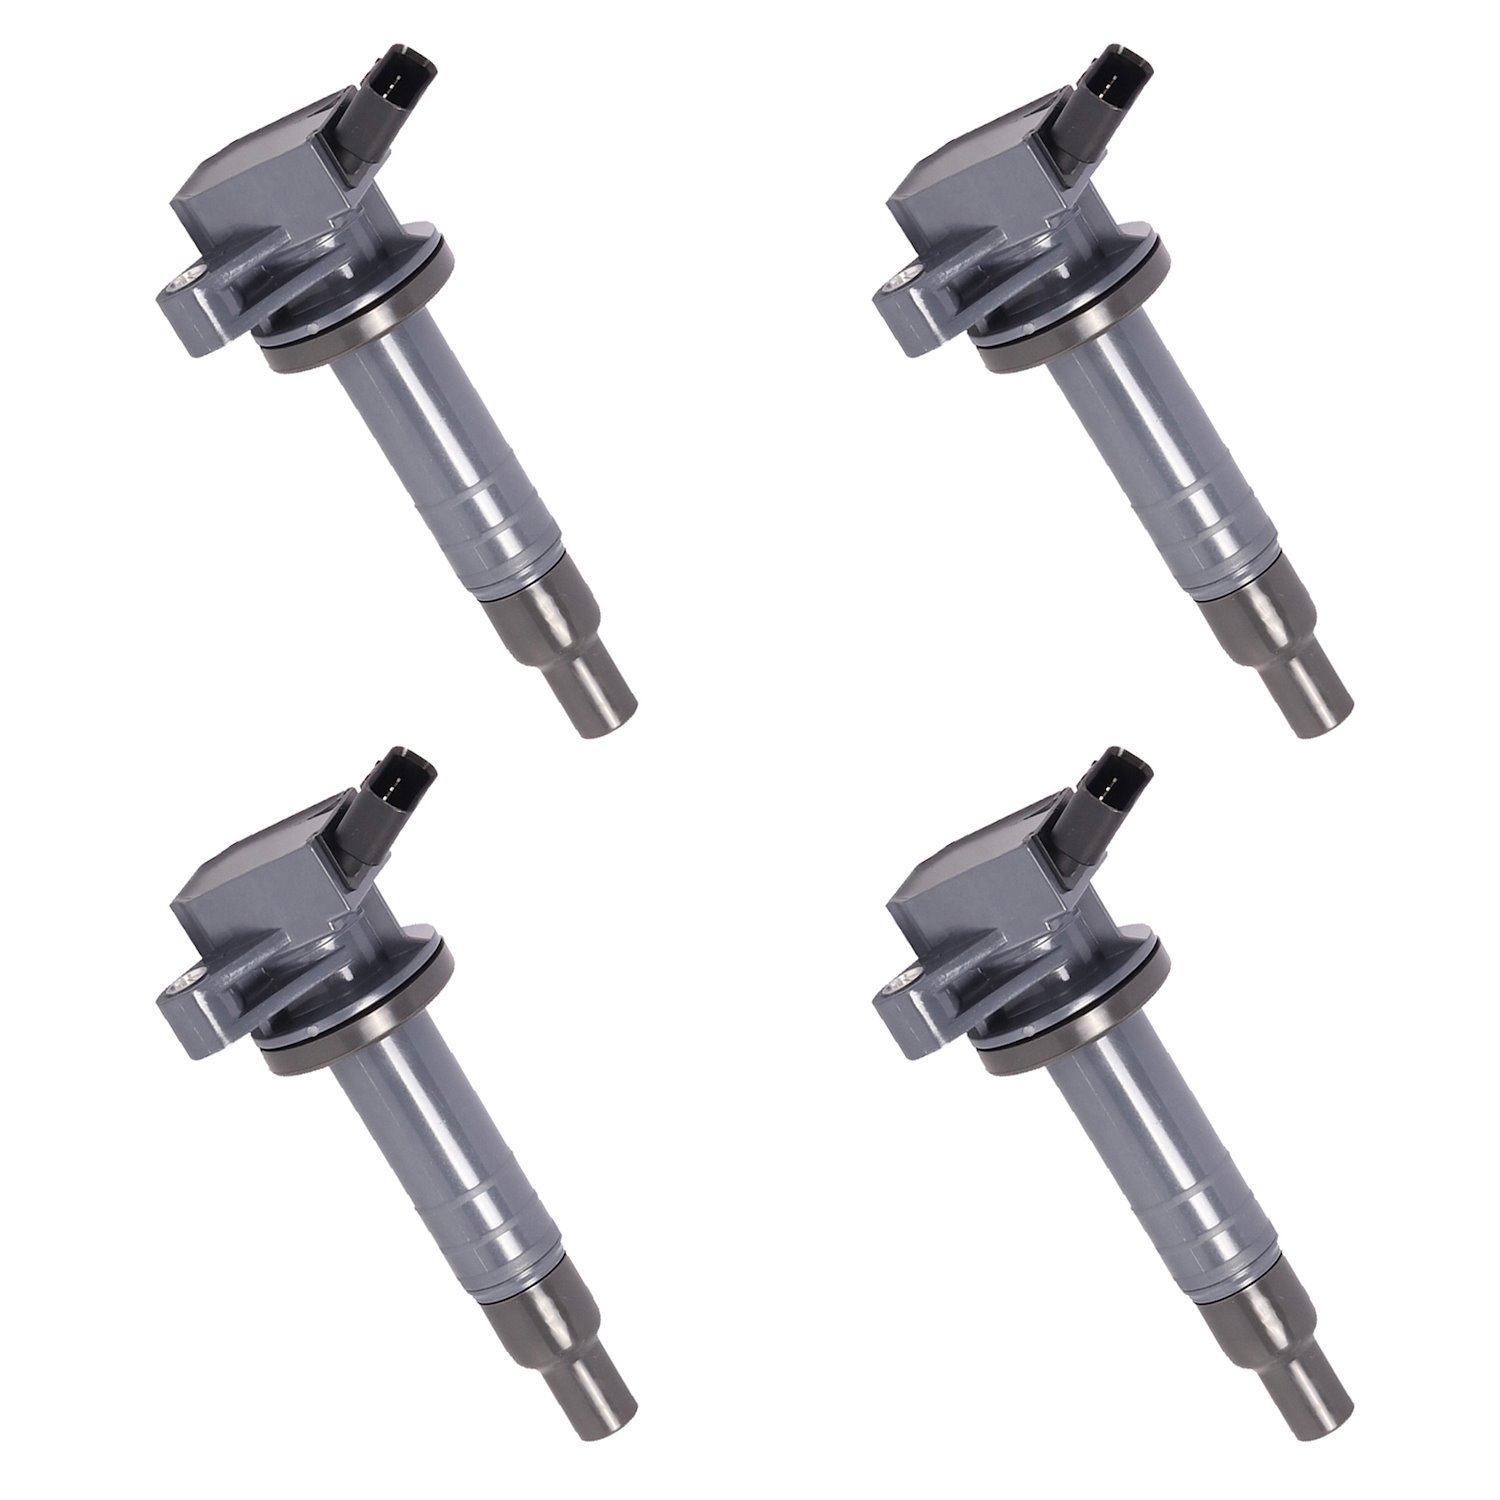 OE Replacement Ignition Coils with Spark Plugs Bundle